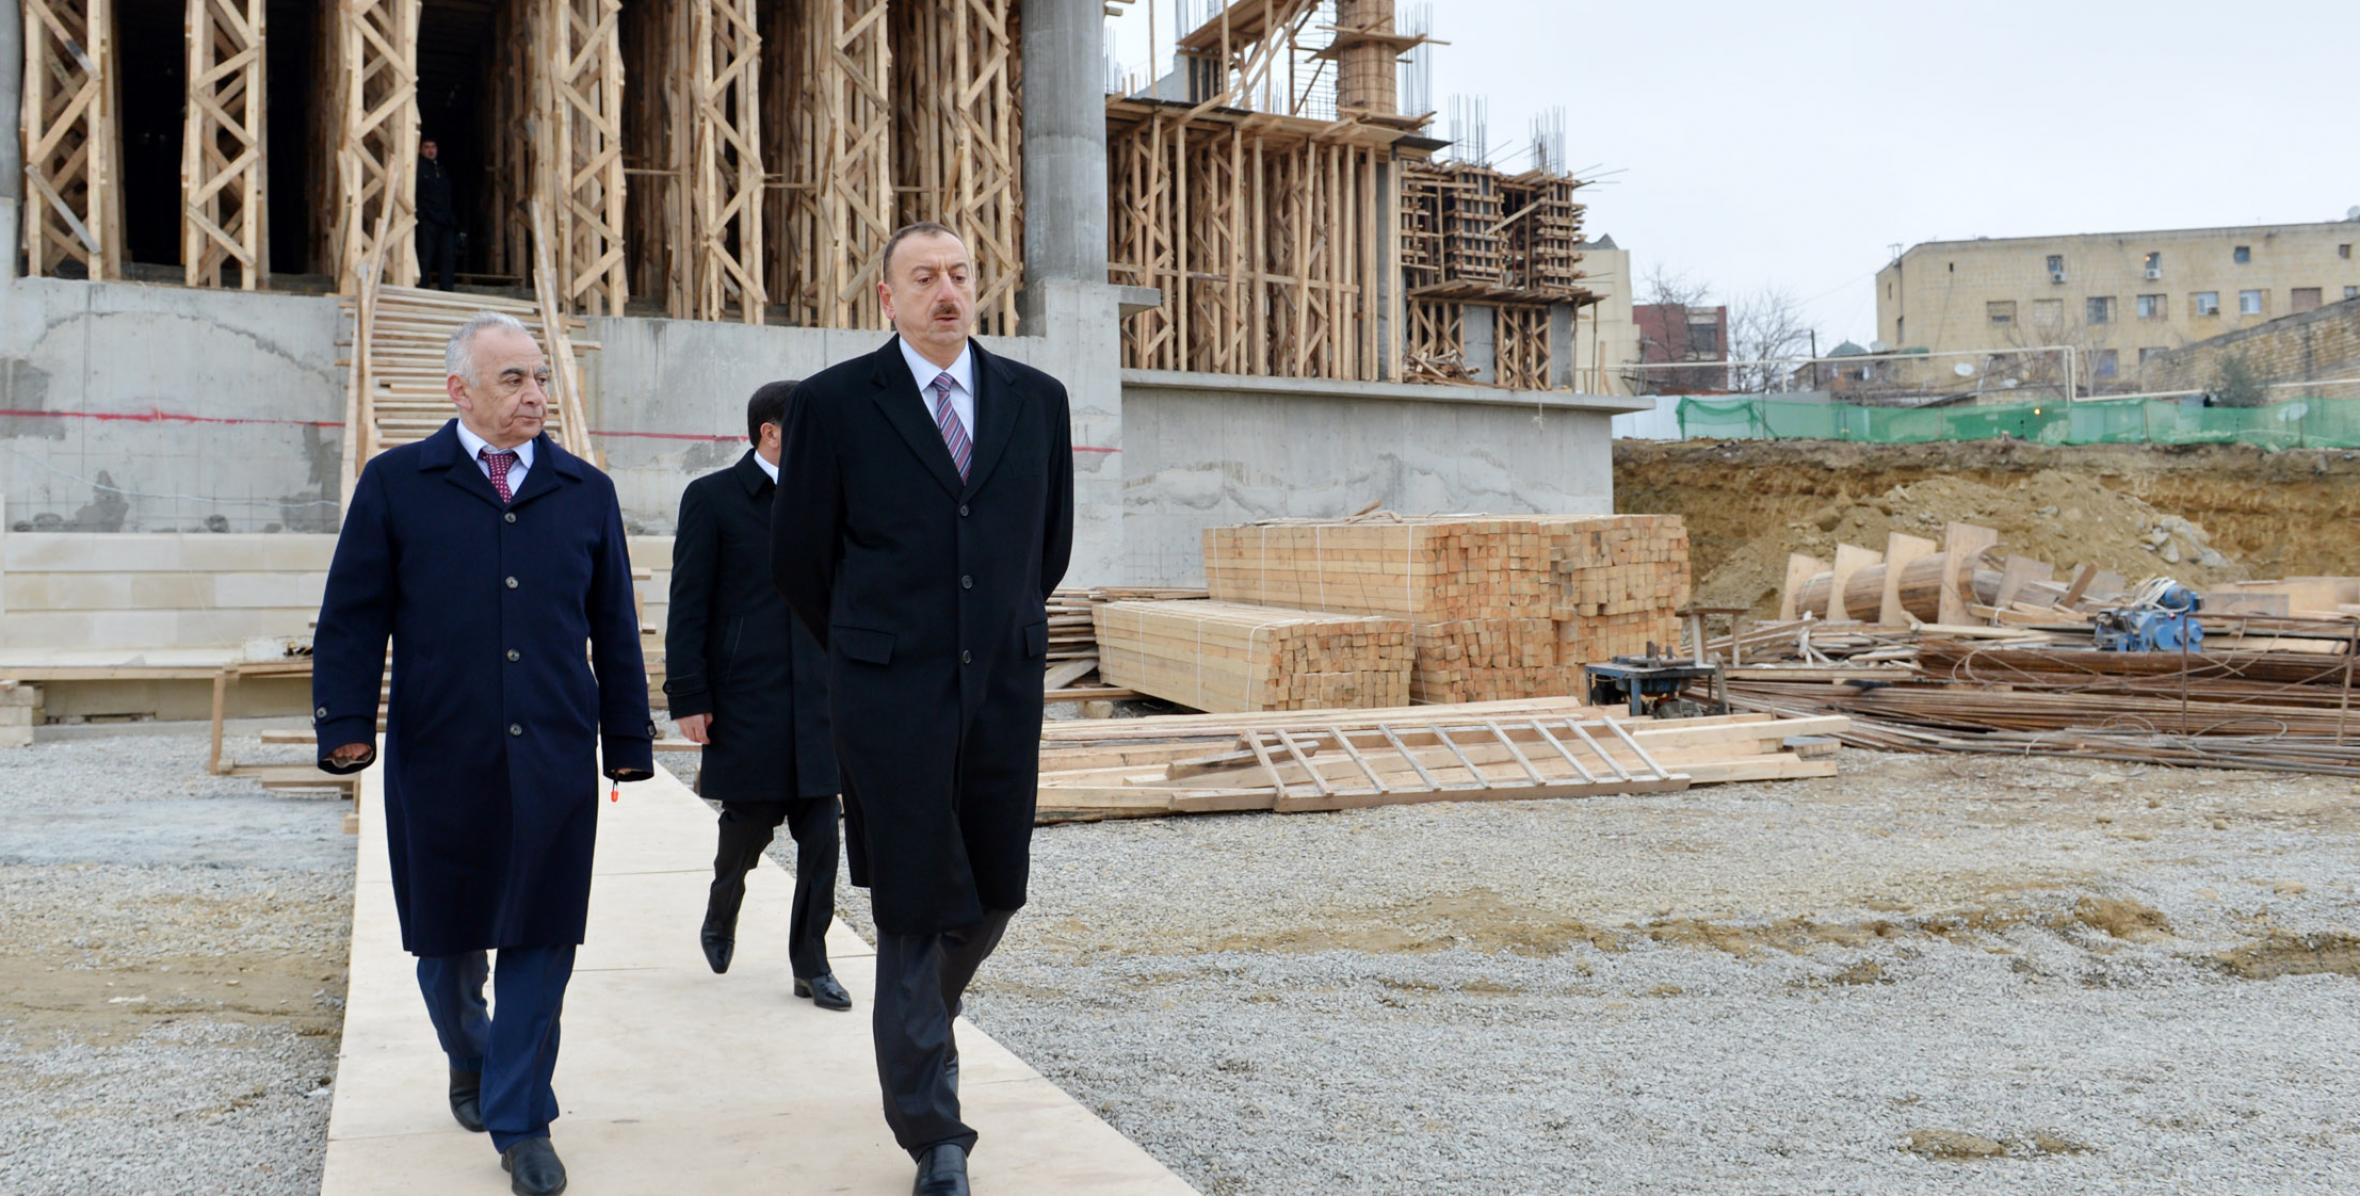 Ilham Aliyev reviewed progress of construction of a mosque in the Binagadi district of Baku